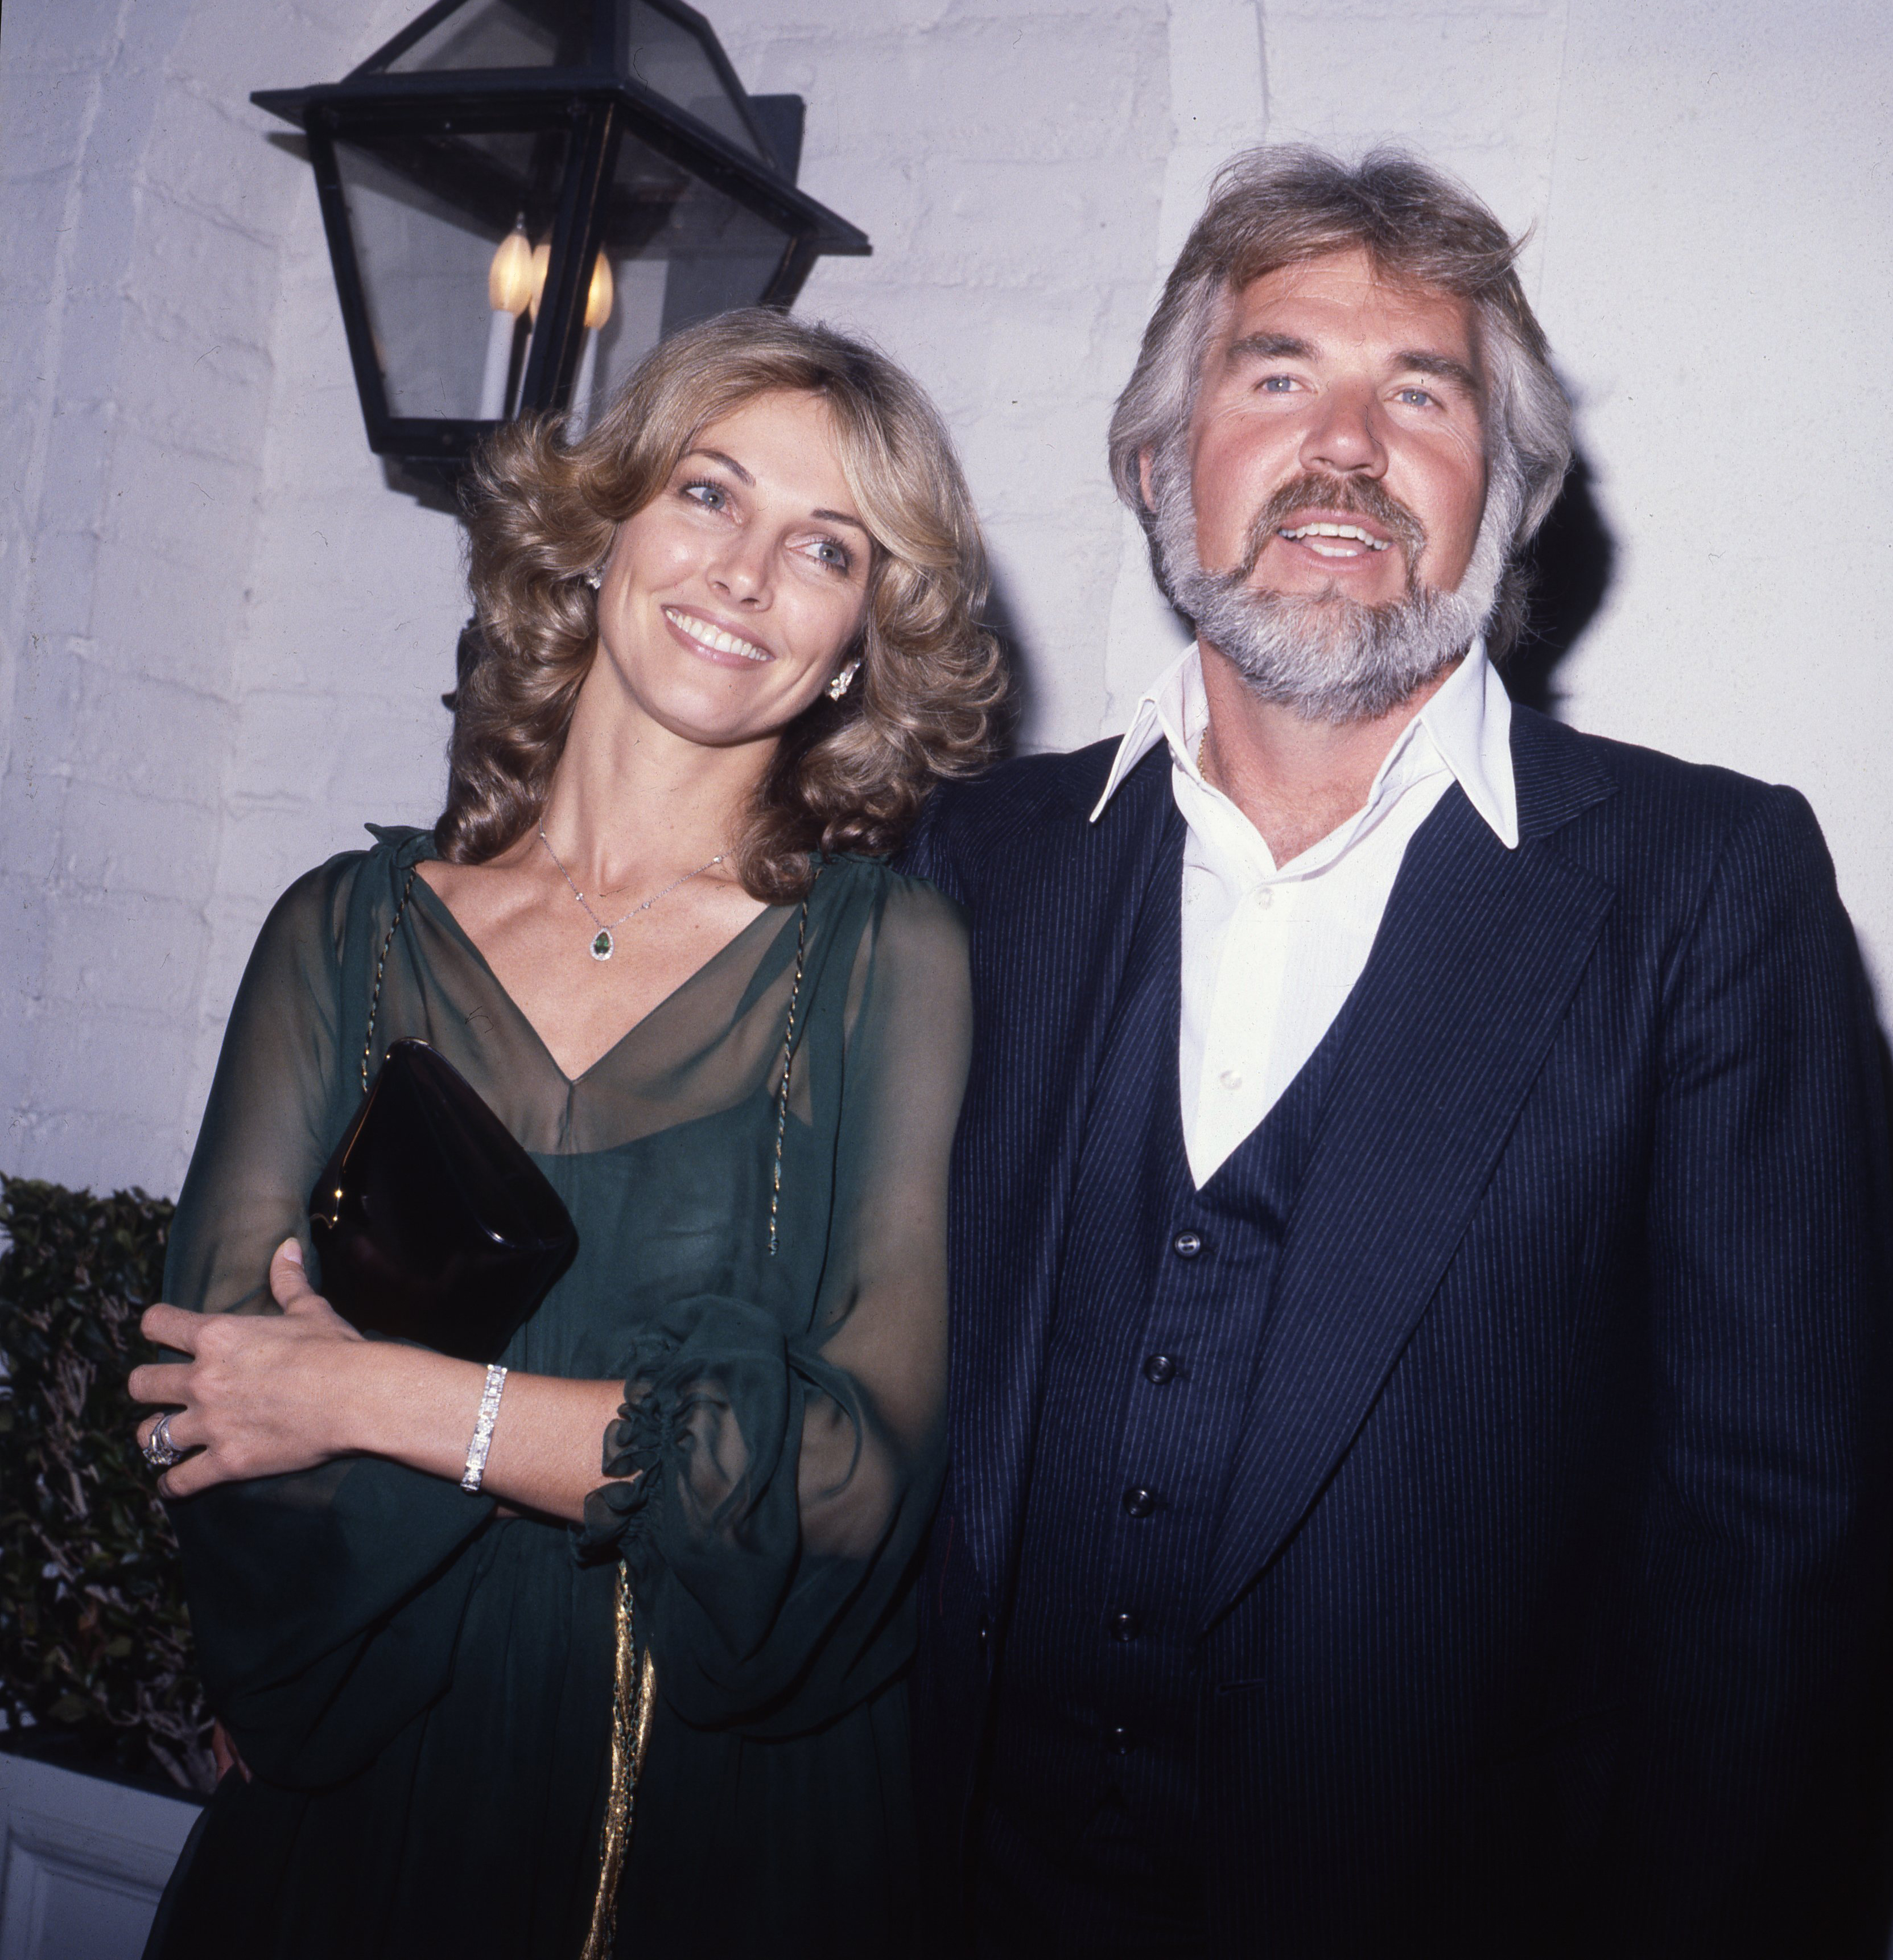 Kenny Rogers and his wife Marianne Gordon attend an event in circa 1980 | Source: Getty Images